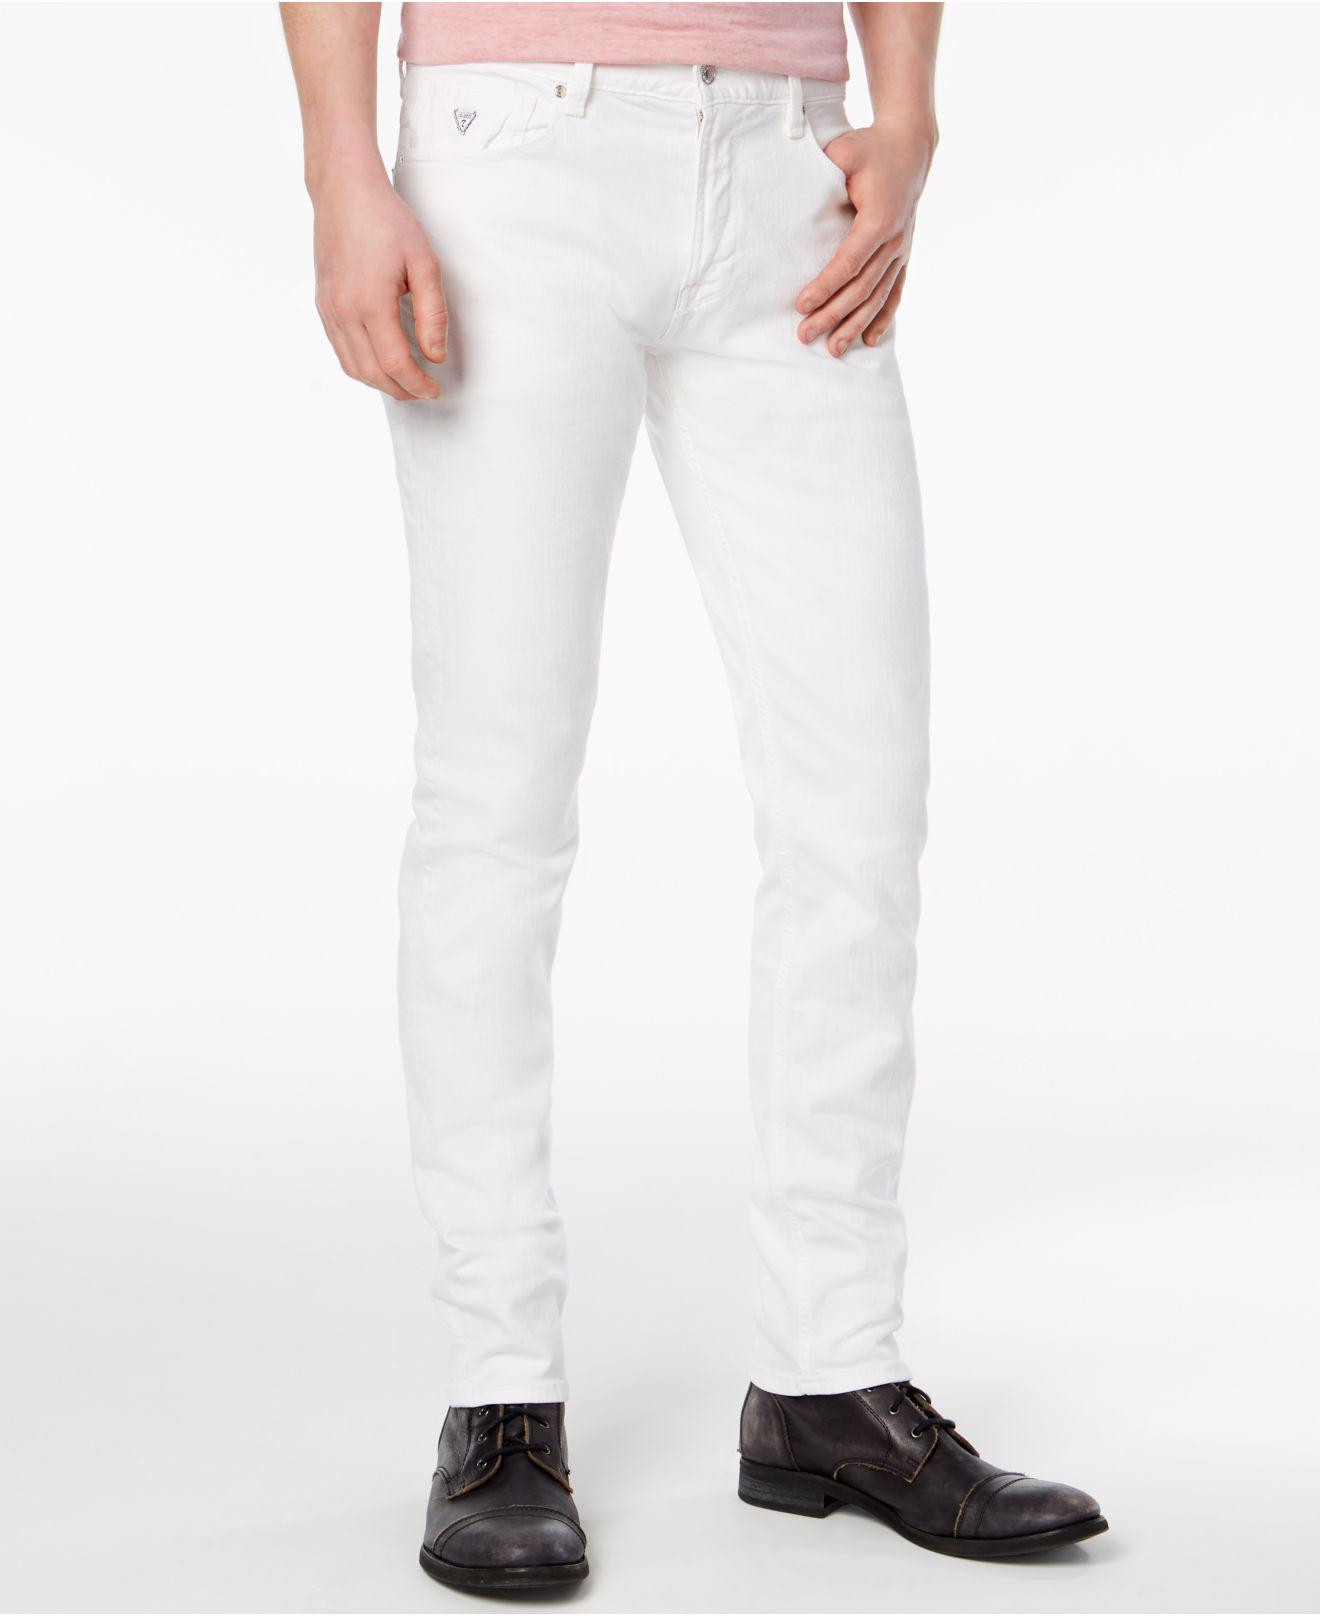 Guess Denim Slim-tapered Fit Stretch White Jeans for Men - Lyst